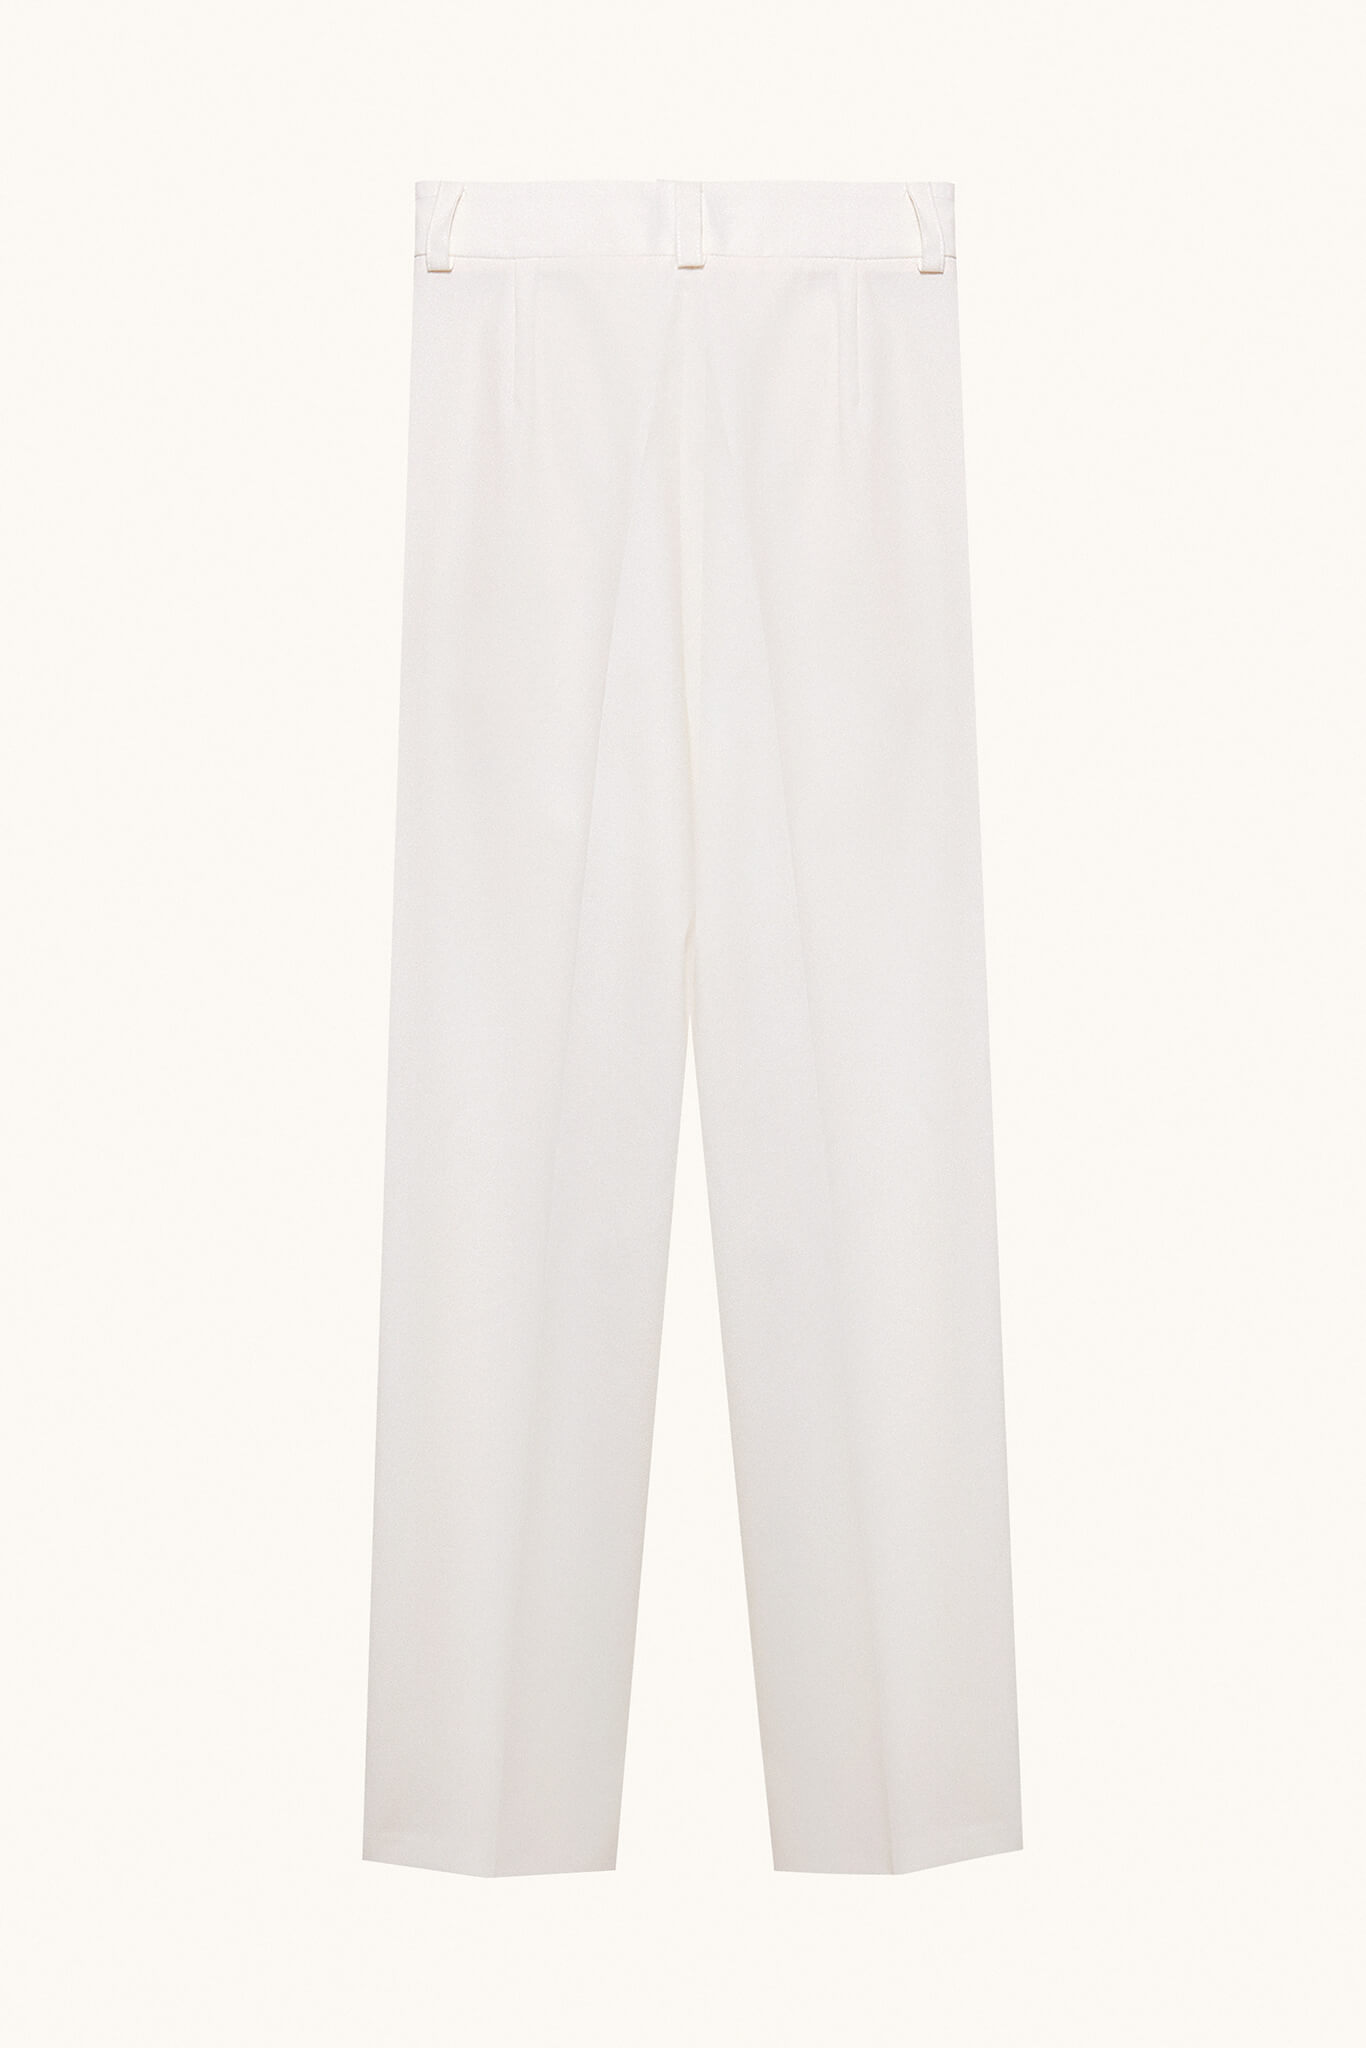 Tapered wool trousers in ivory - EPUZER.COM